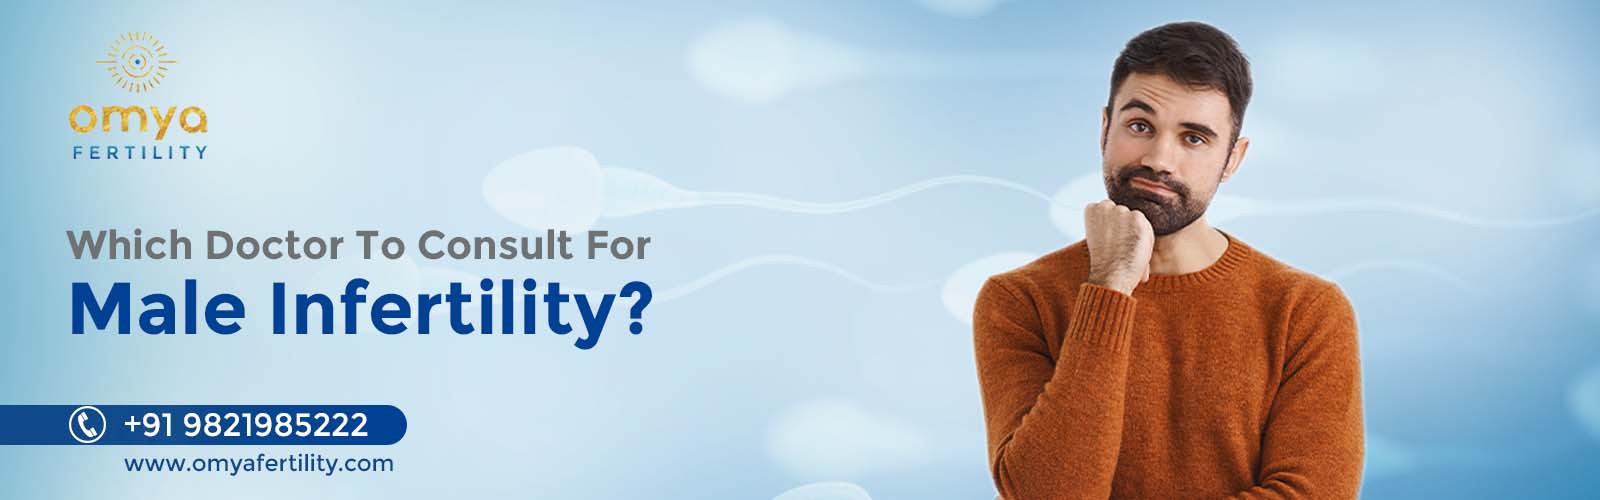 Male Infertility Doctor: Which Doctor to Consult for Male Infertility Treatment in Delhi